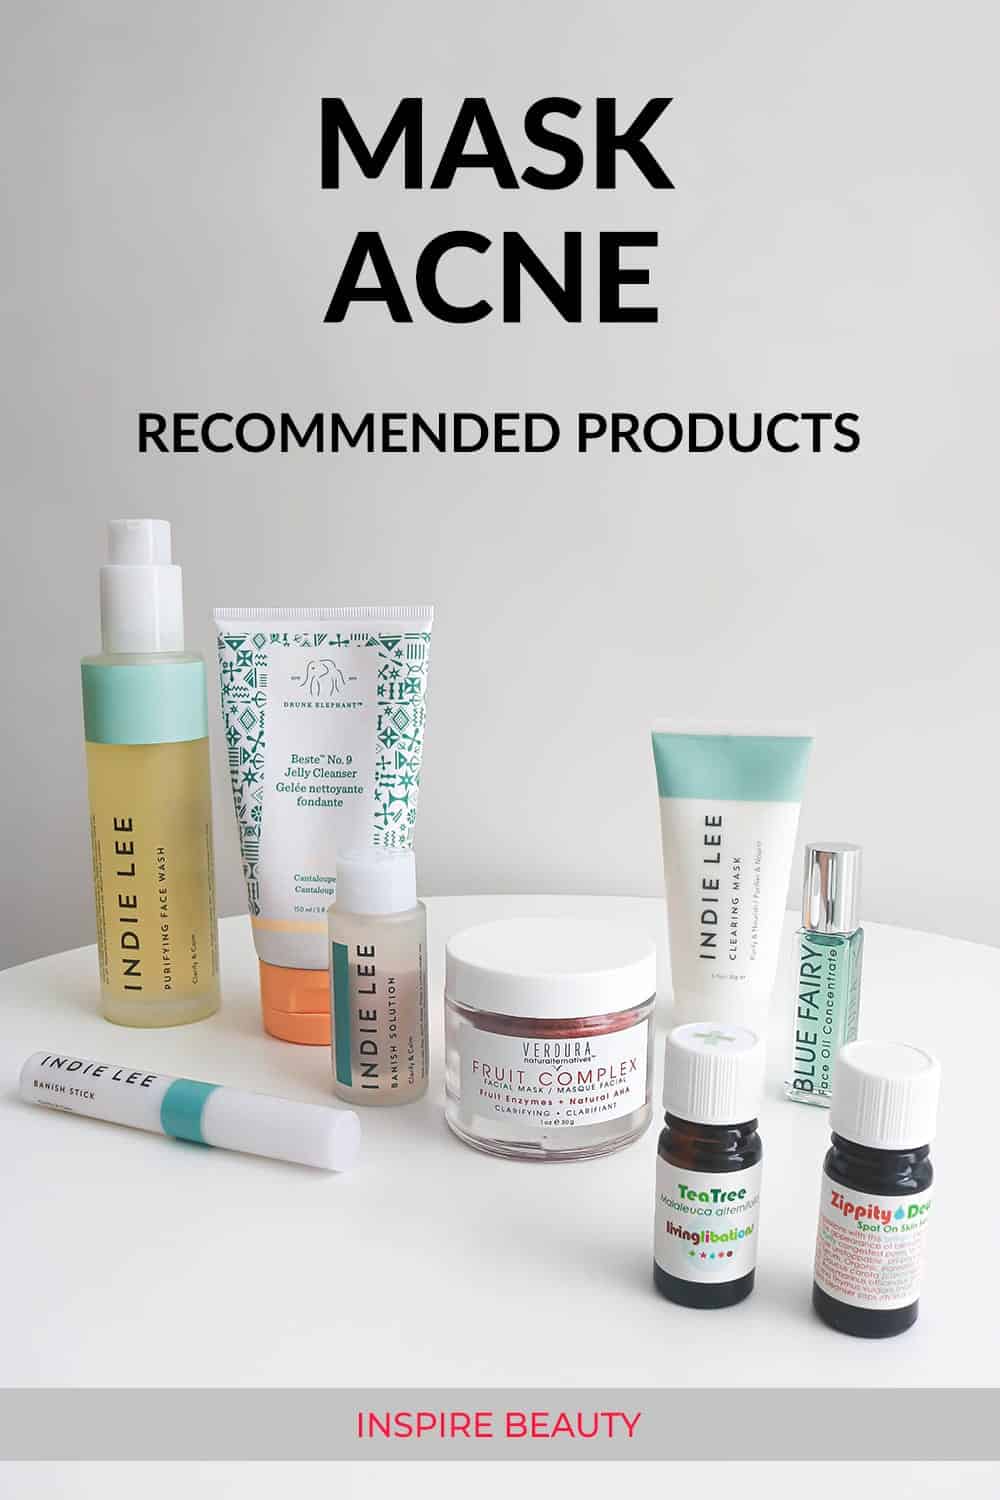 Recommended mild and clarifying skin care products for mask acne: Indie Lee Clearing Mask, Indie Lee Banish Solution, Verdura naturalternative Fruit Complex and Blue Fairy, Tea Tree Oil